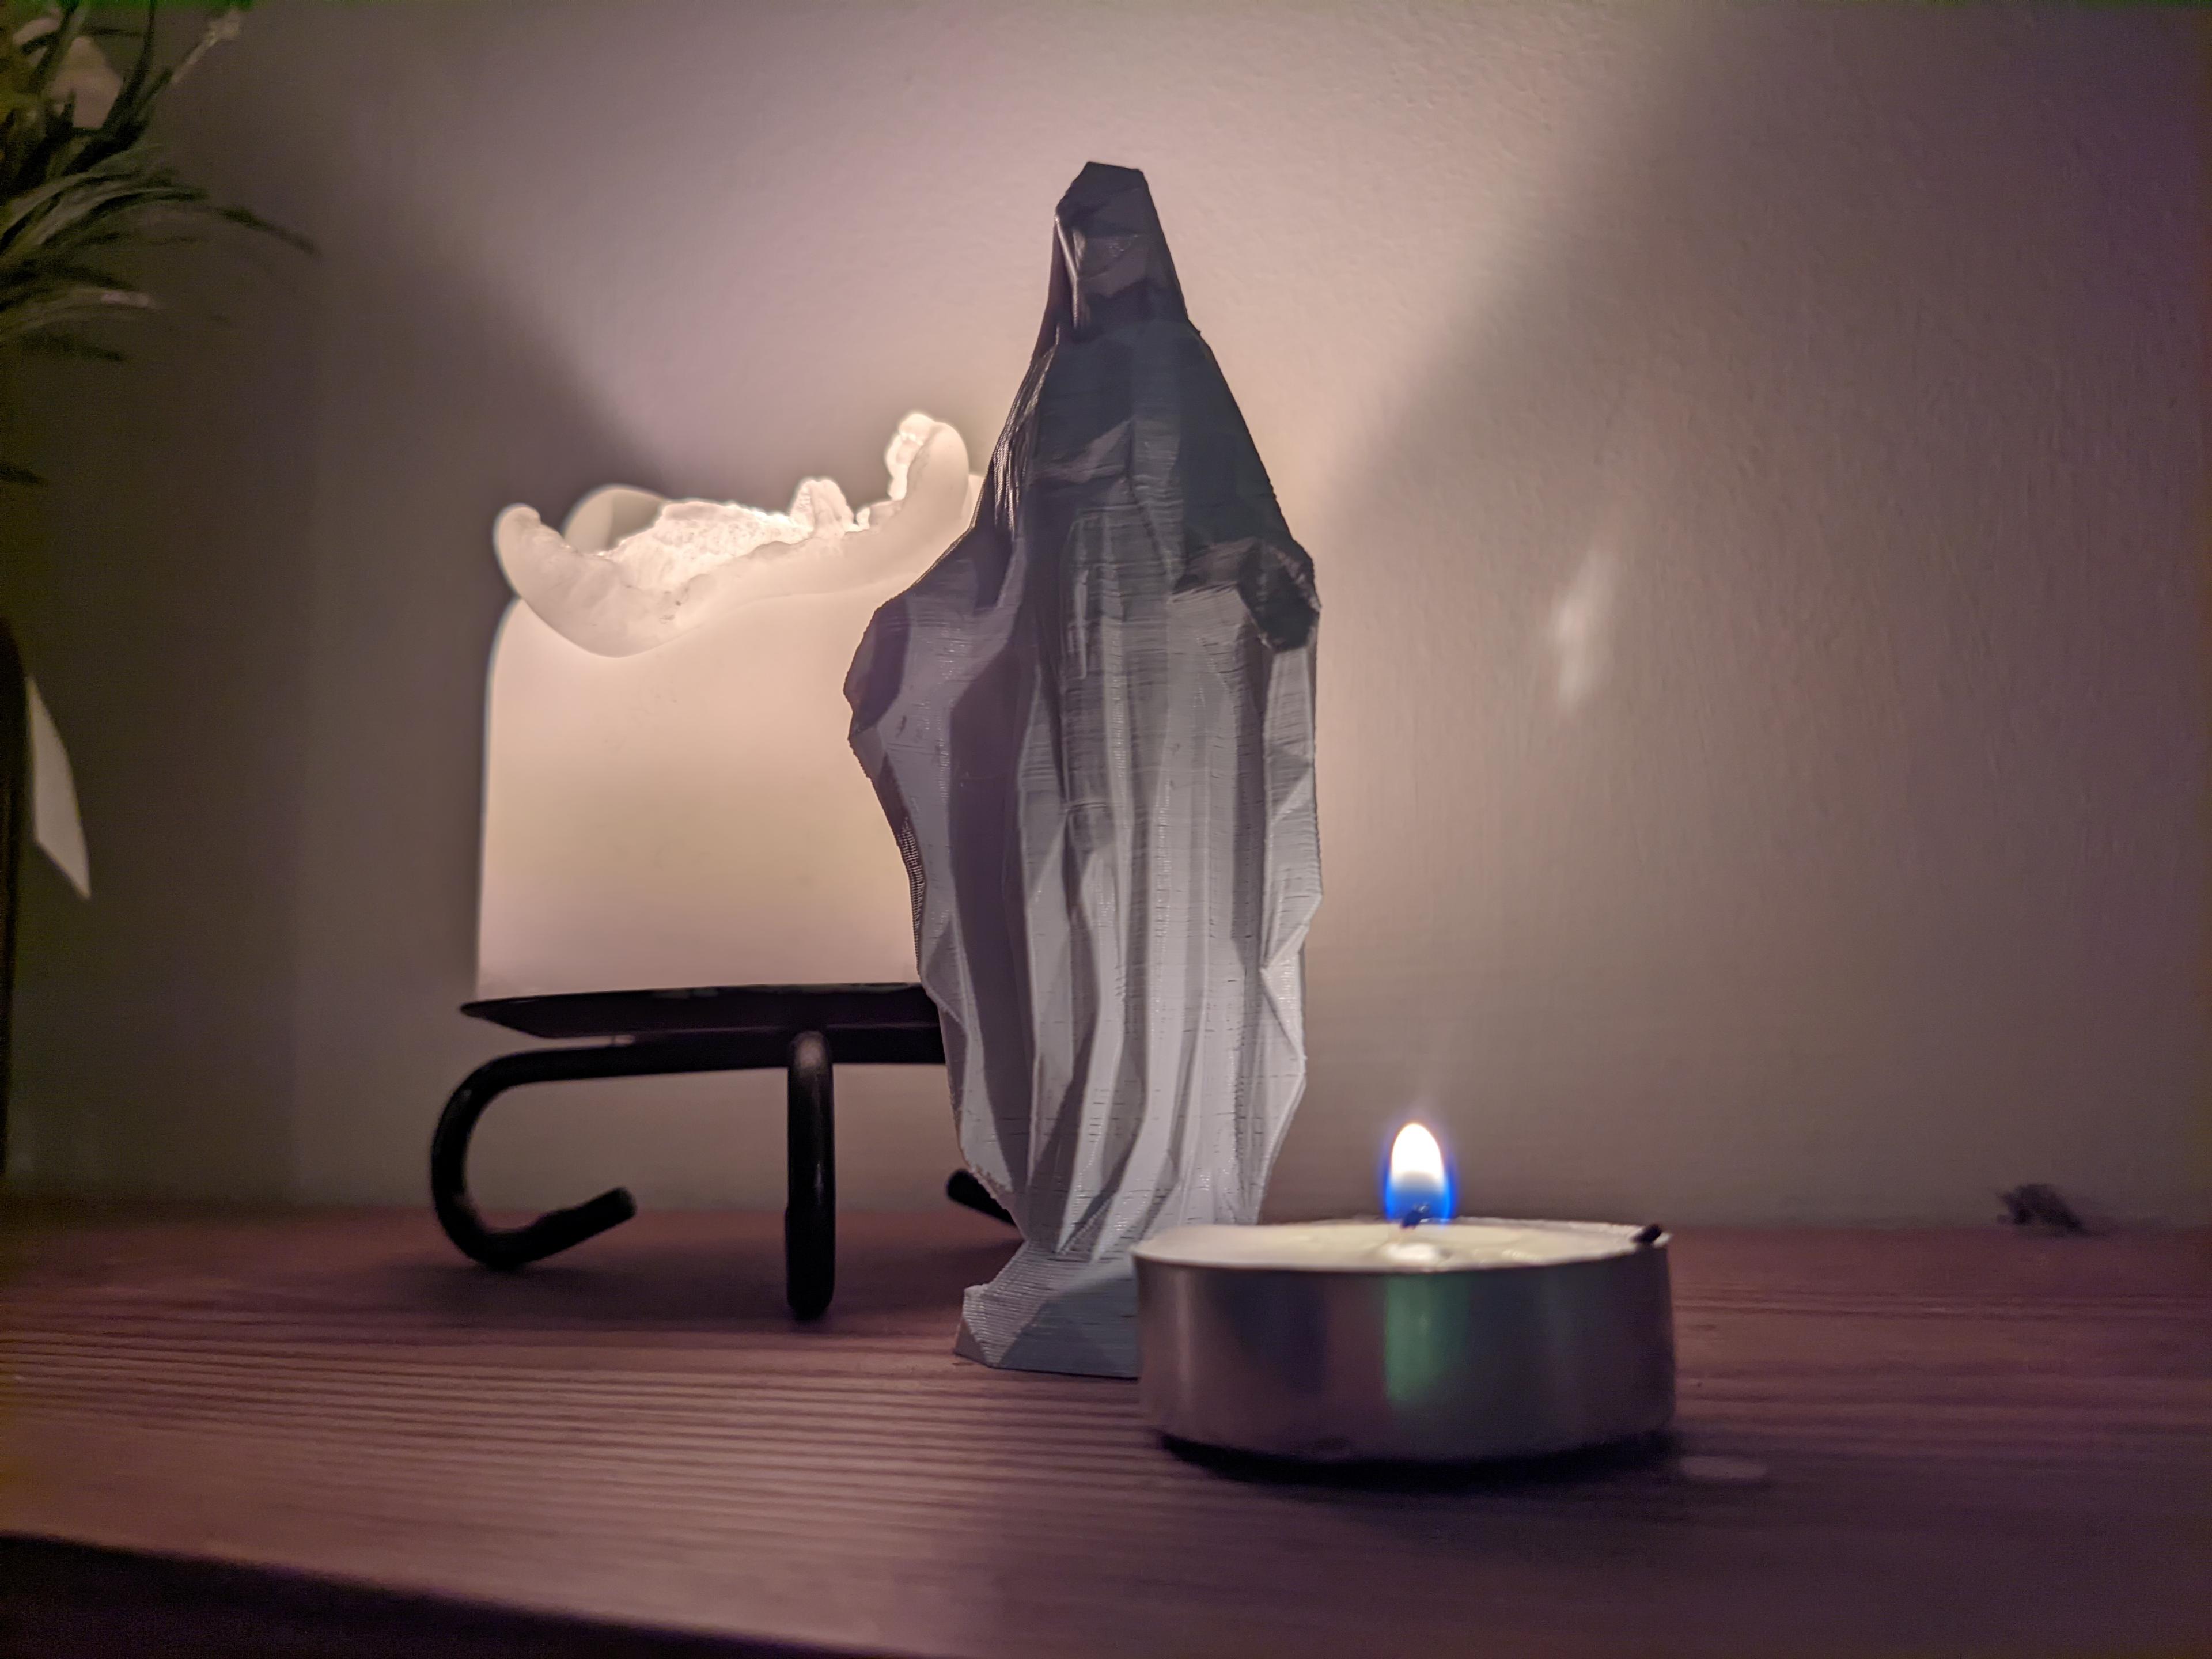 Virgin Mary Figurine [ Low-Poly ] 3d model